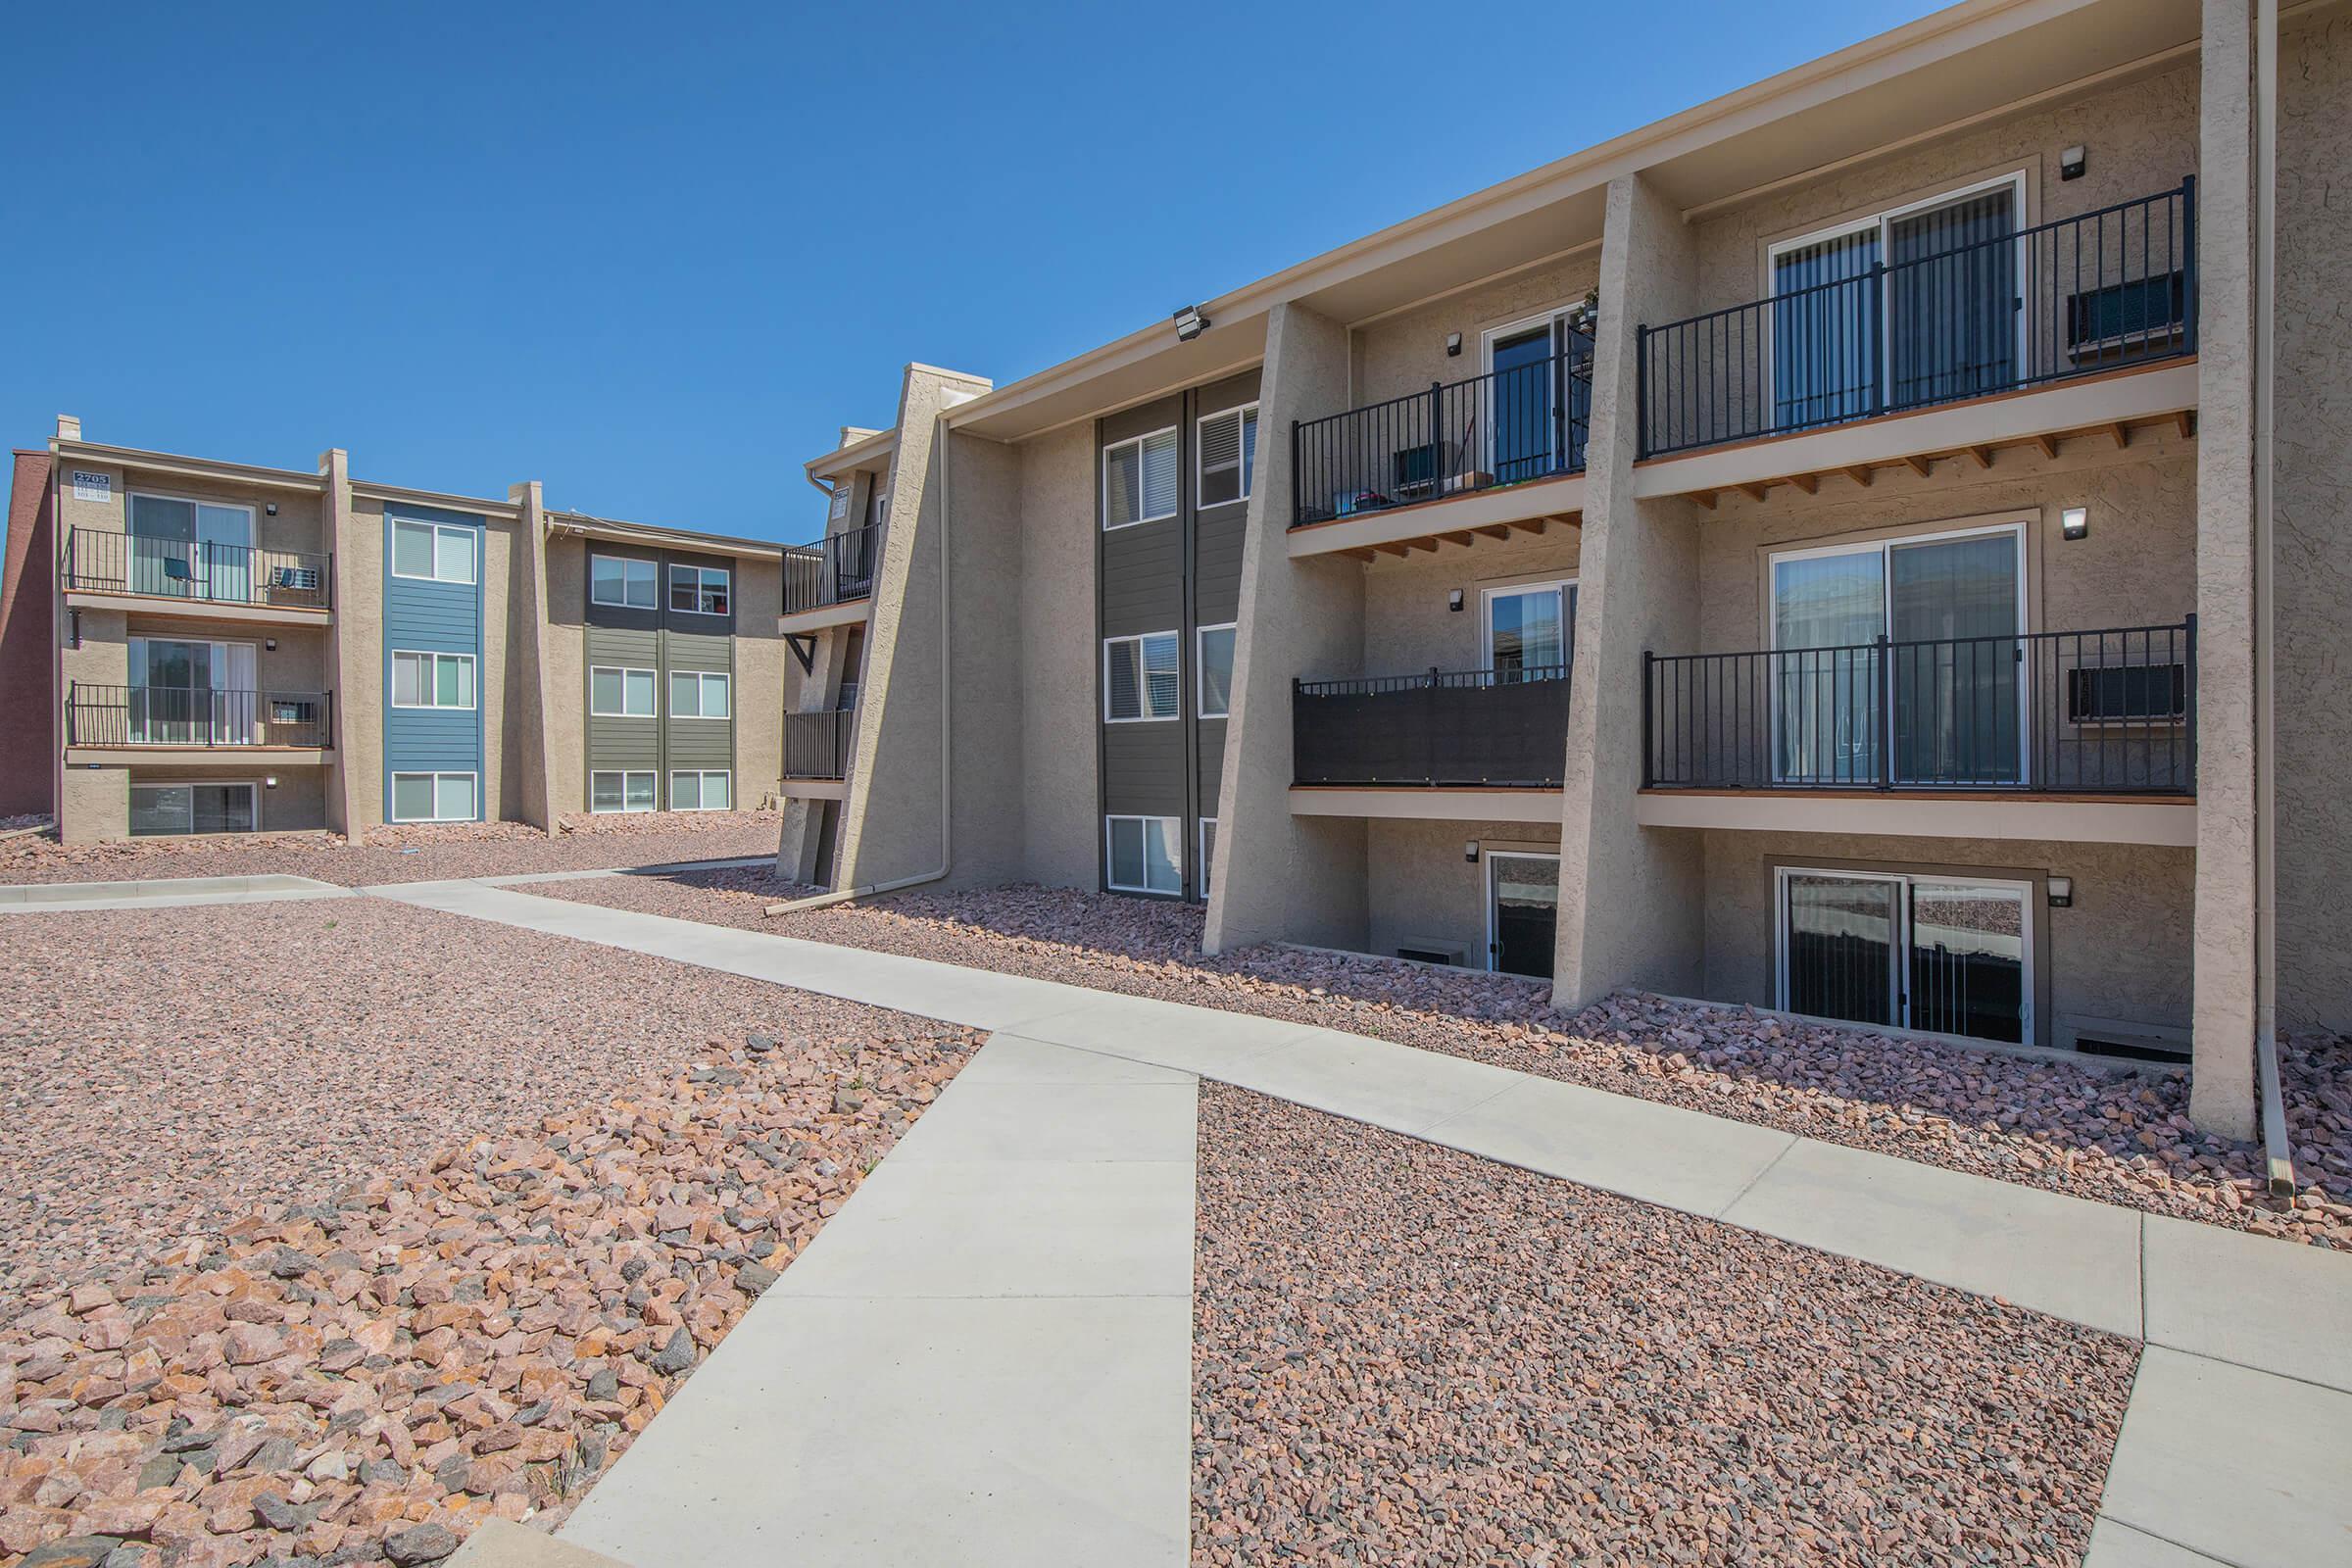 One and two bedroom apartments with balconies at the Sedona Ridge Apartments, in Colorado Springs, CO